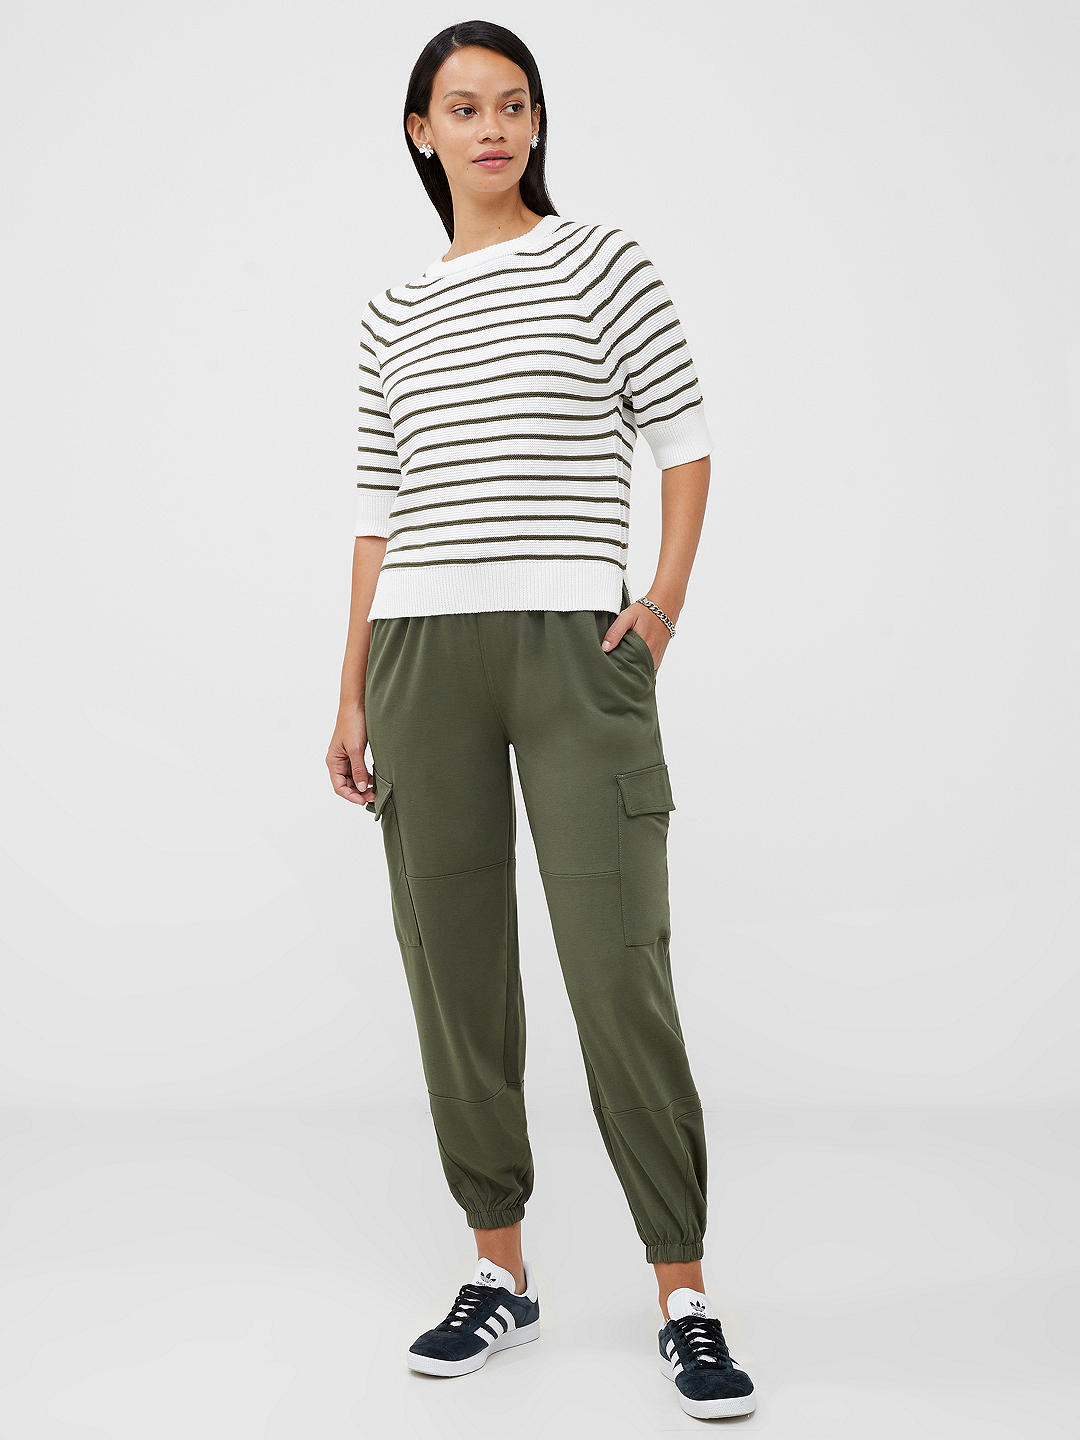 French Connection Lily Mozart Stripe Cotton Jumper, Summer White/Utility